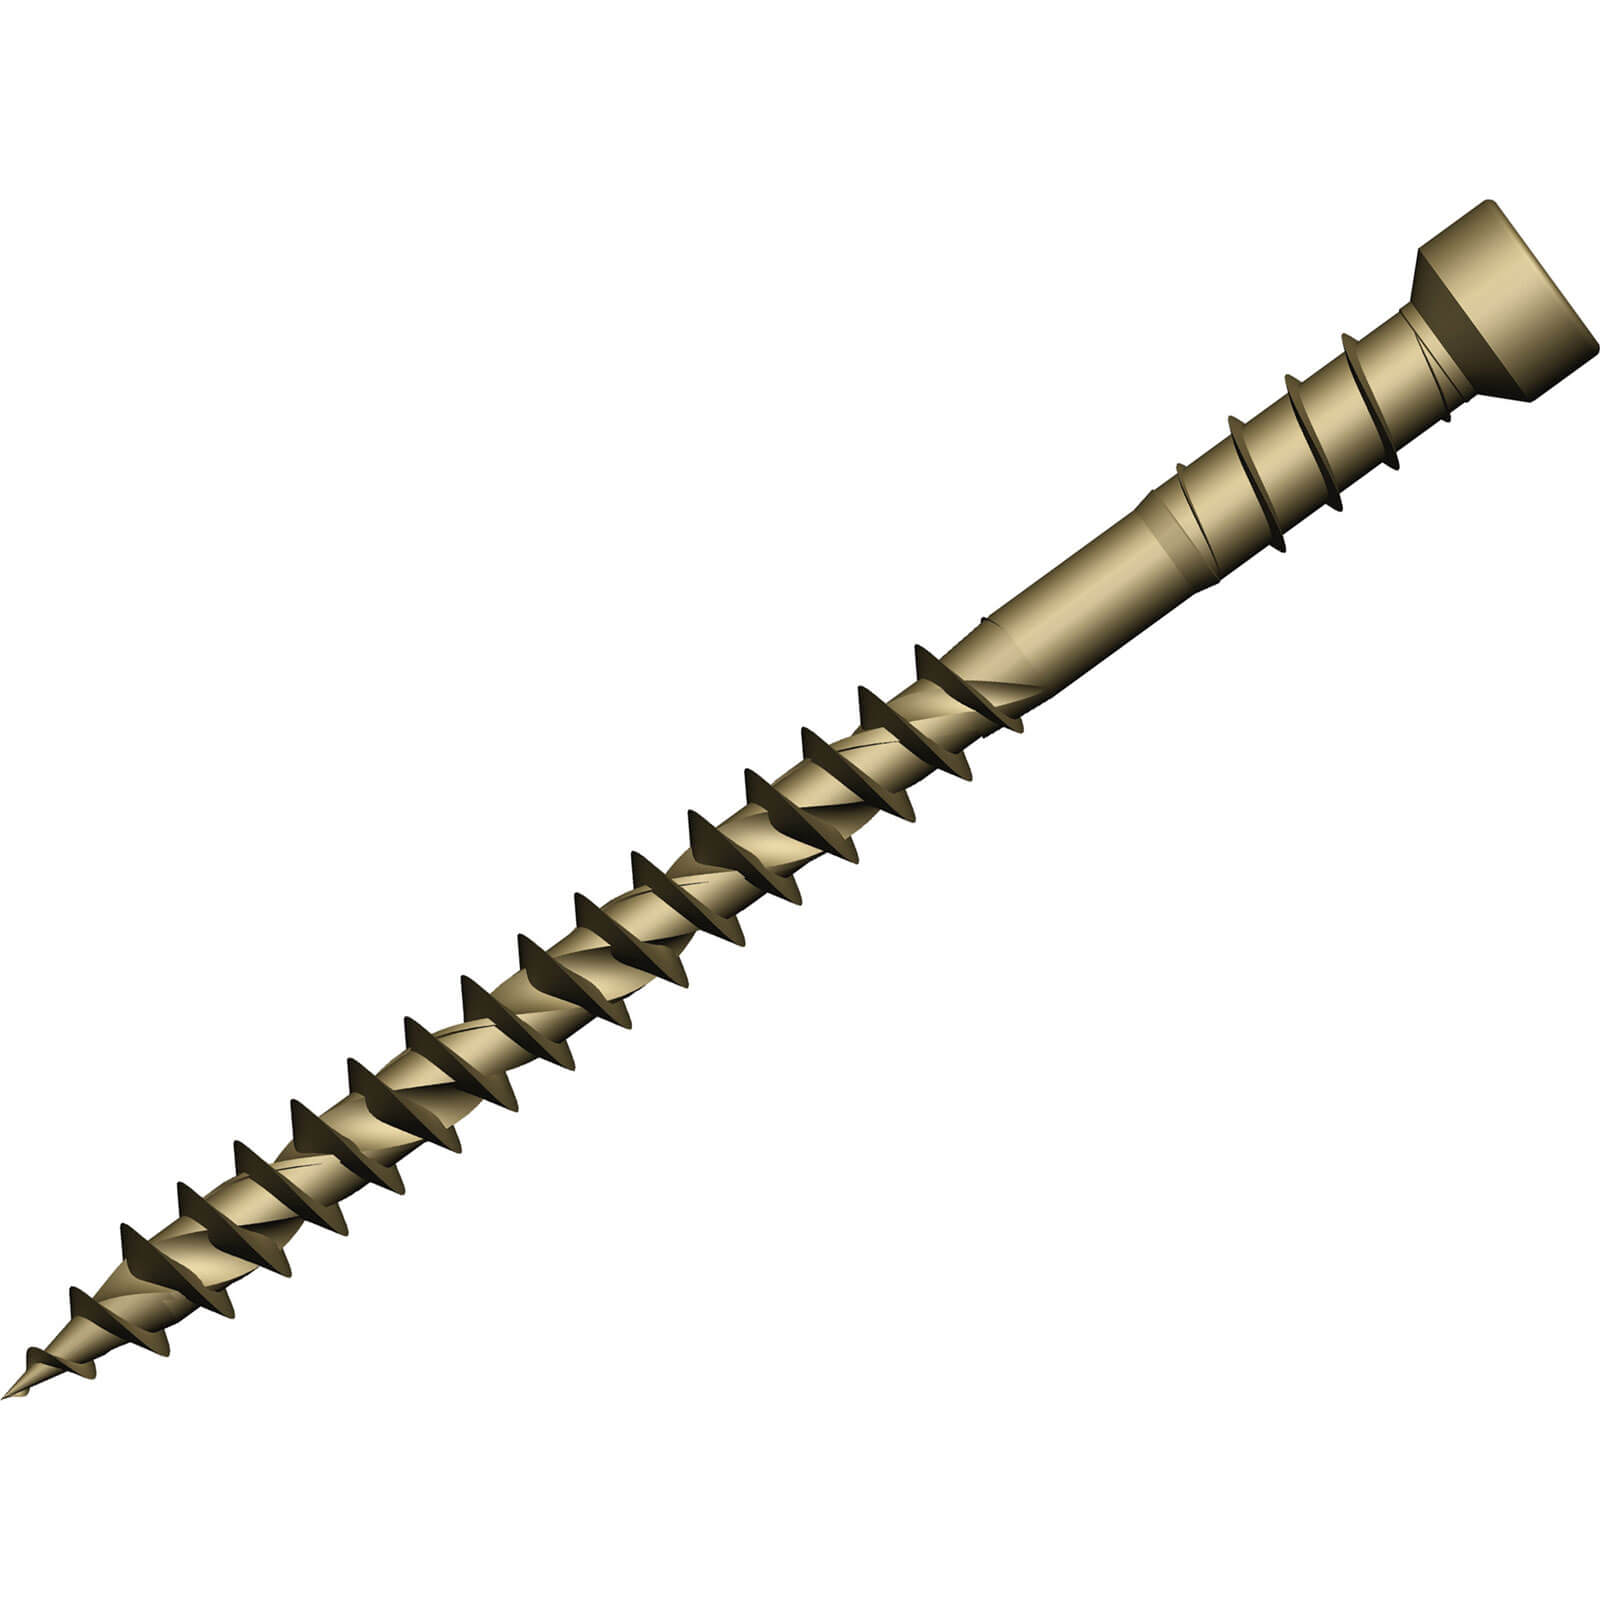 Image of Forgefix Reduced Head Torx Decking Screws Tan 4.5mm 60mm Pack of 500